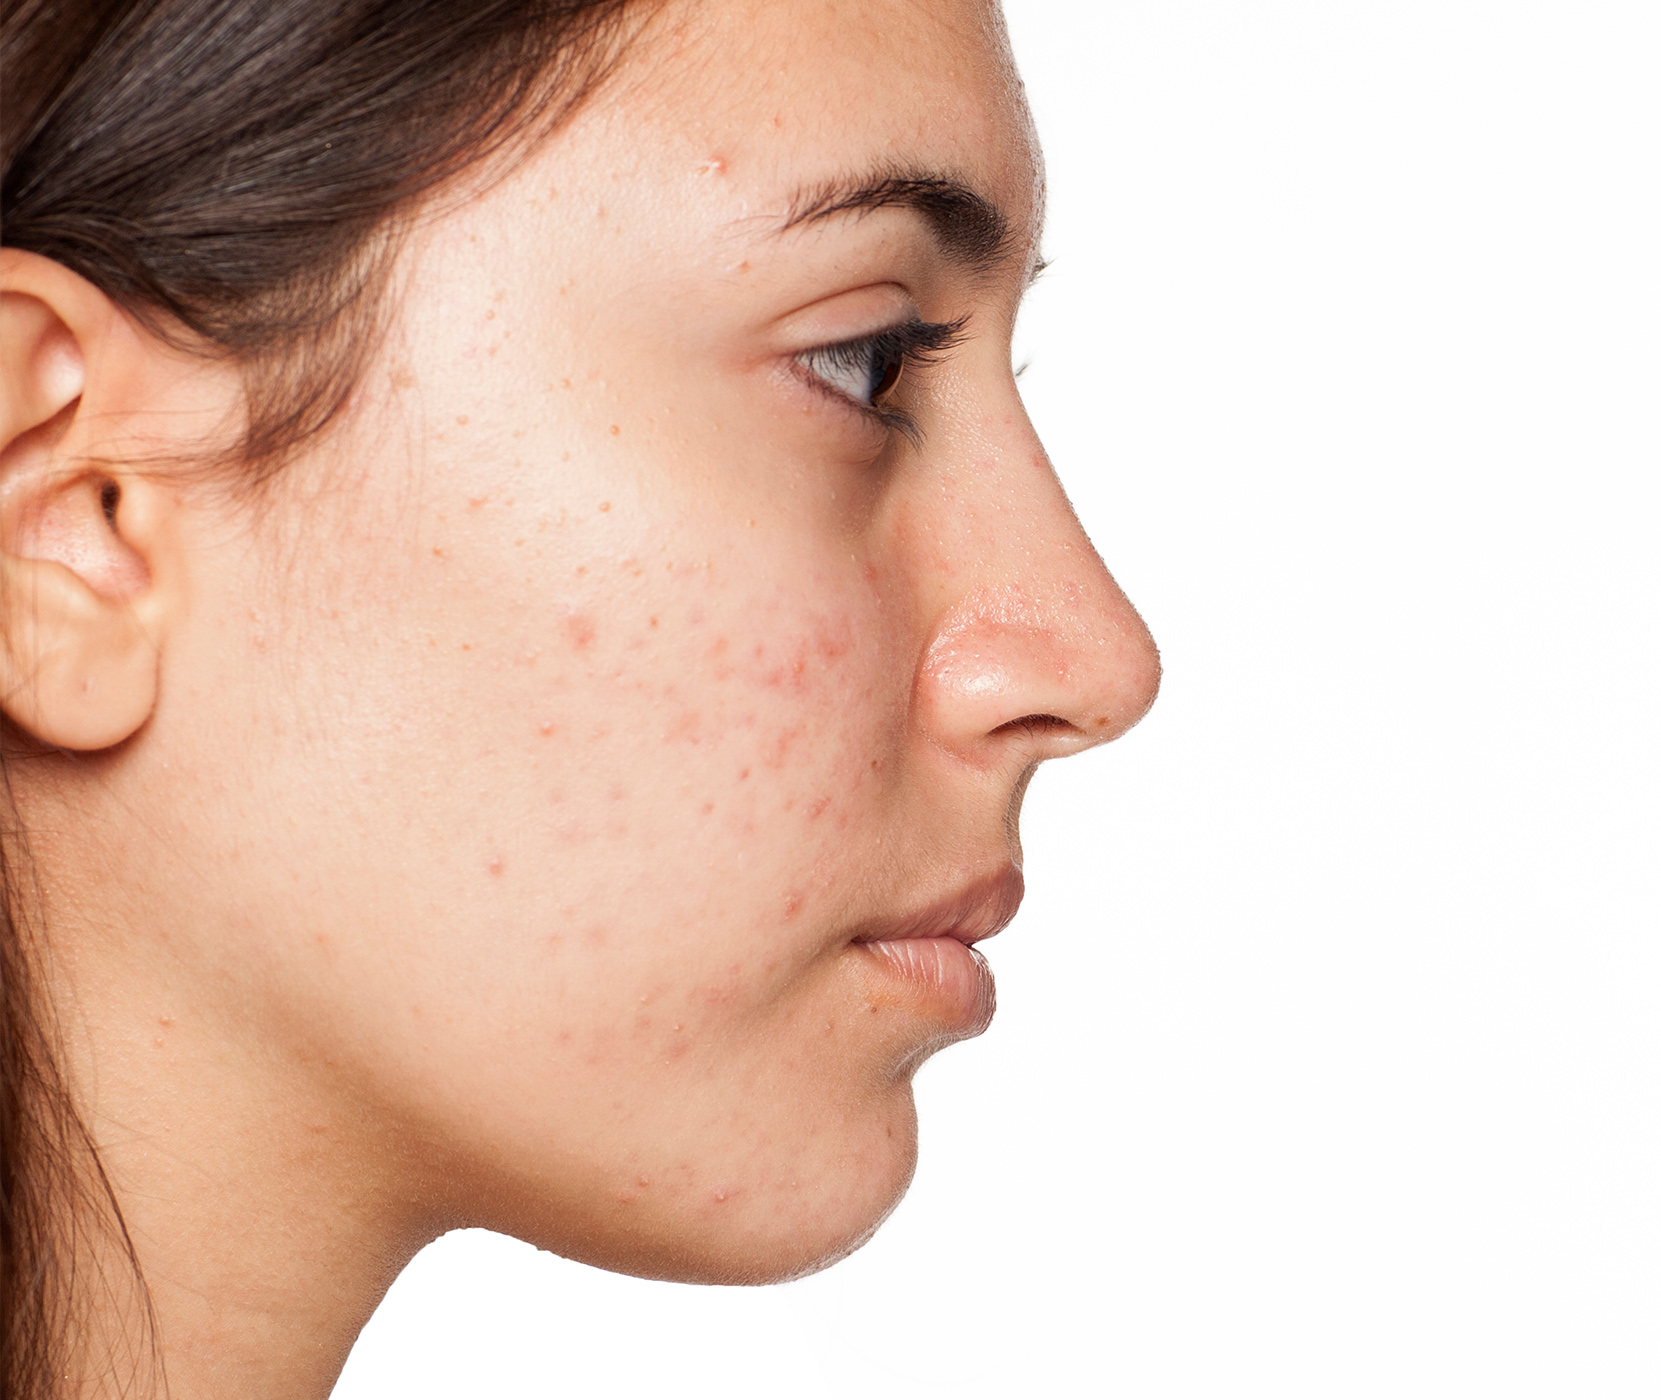 Woman's face with acne